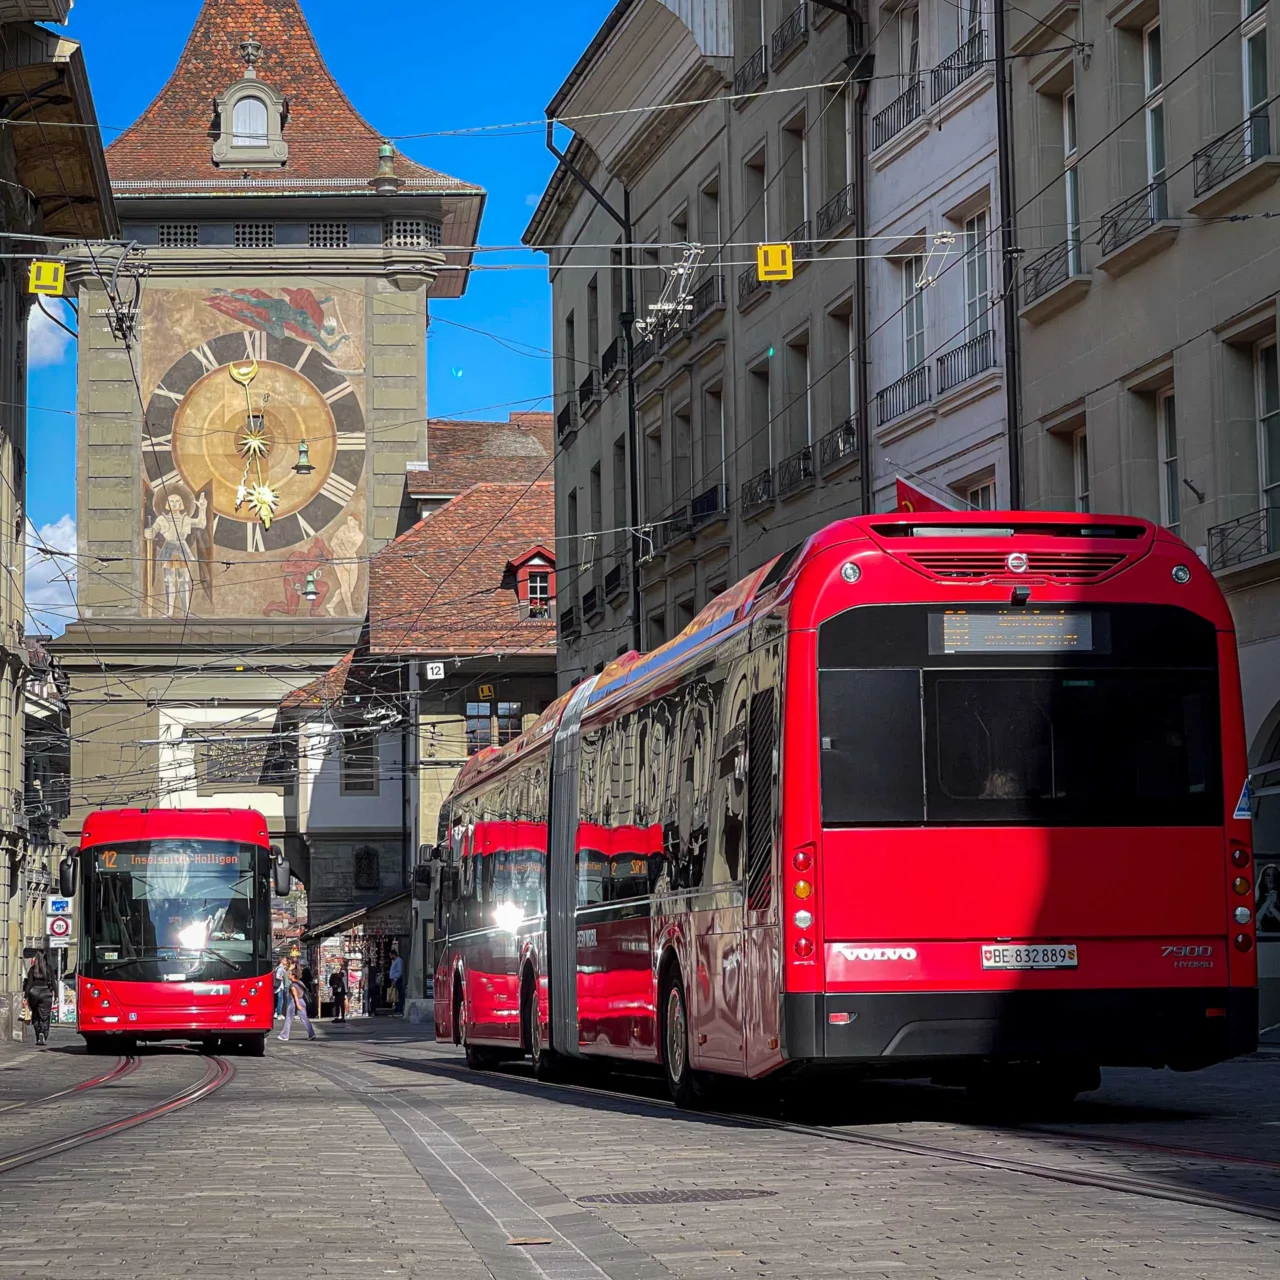 Bus and tram at Zytglogge in Bern